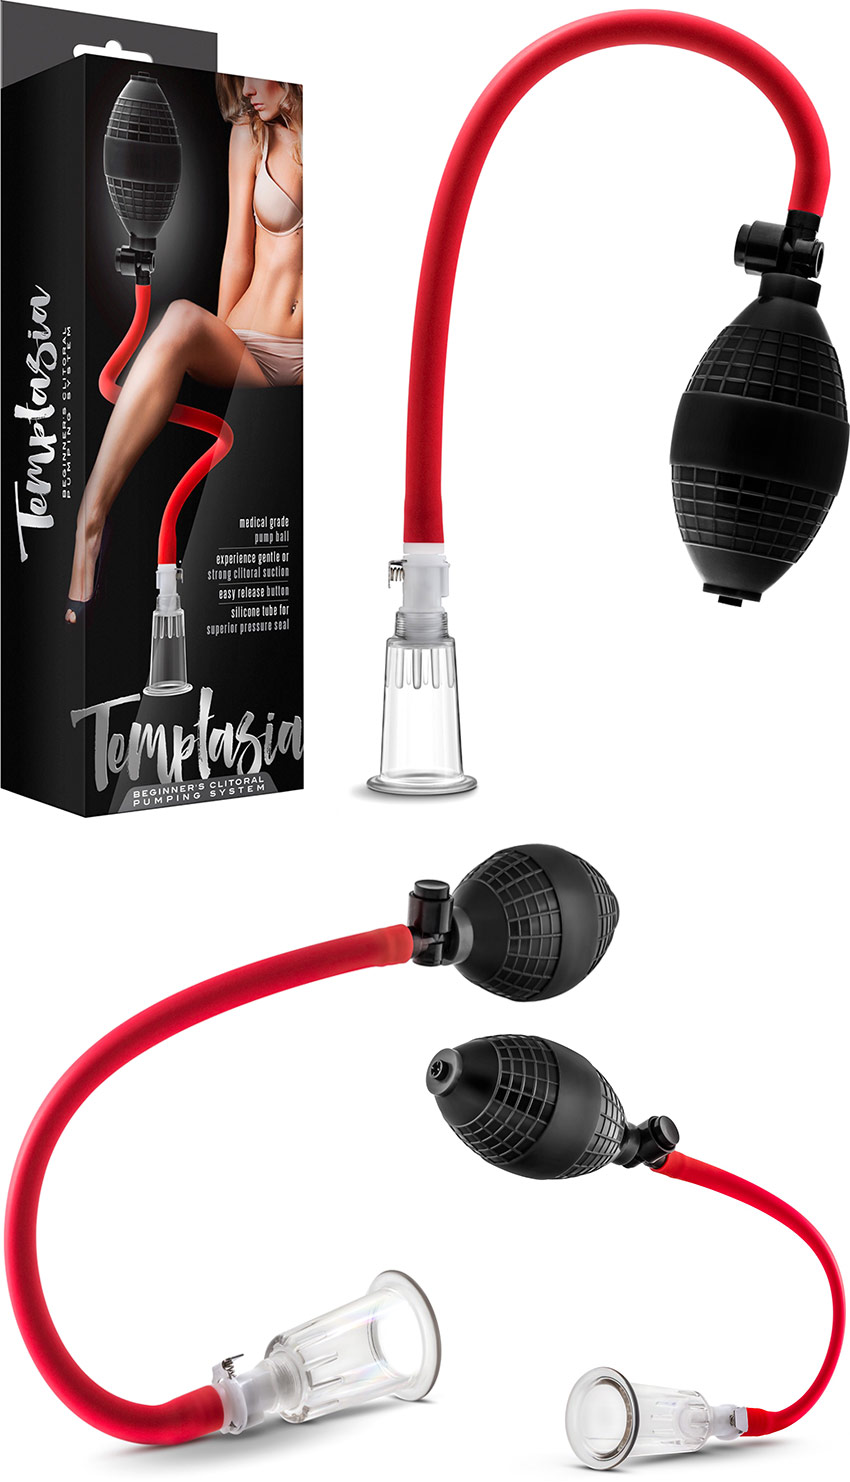 Temptasia clitoral pump with detachable cylinder